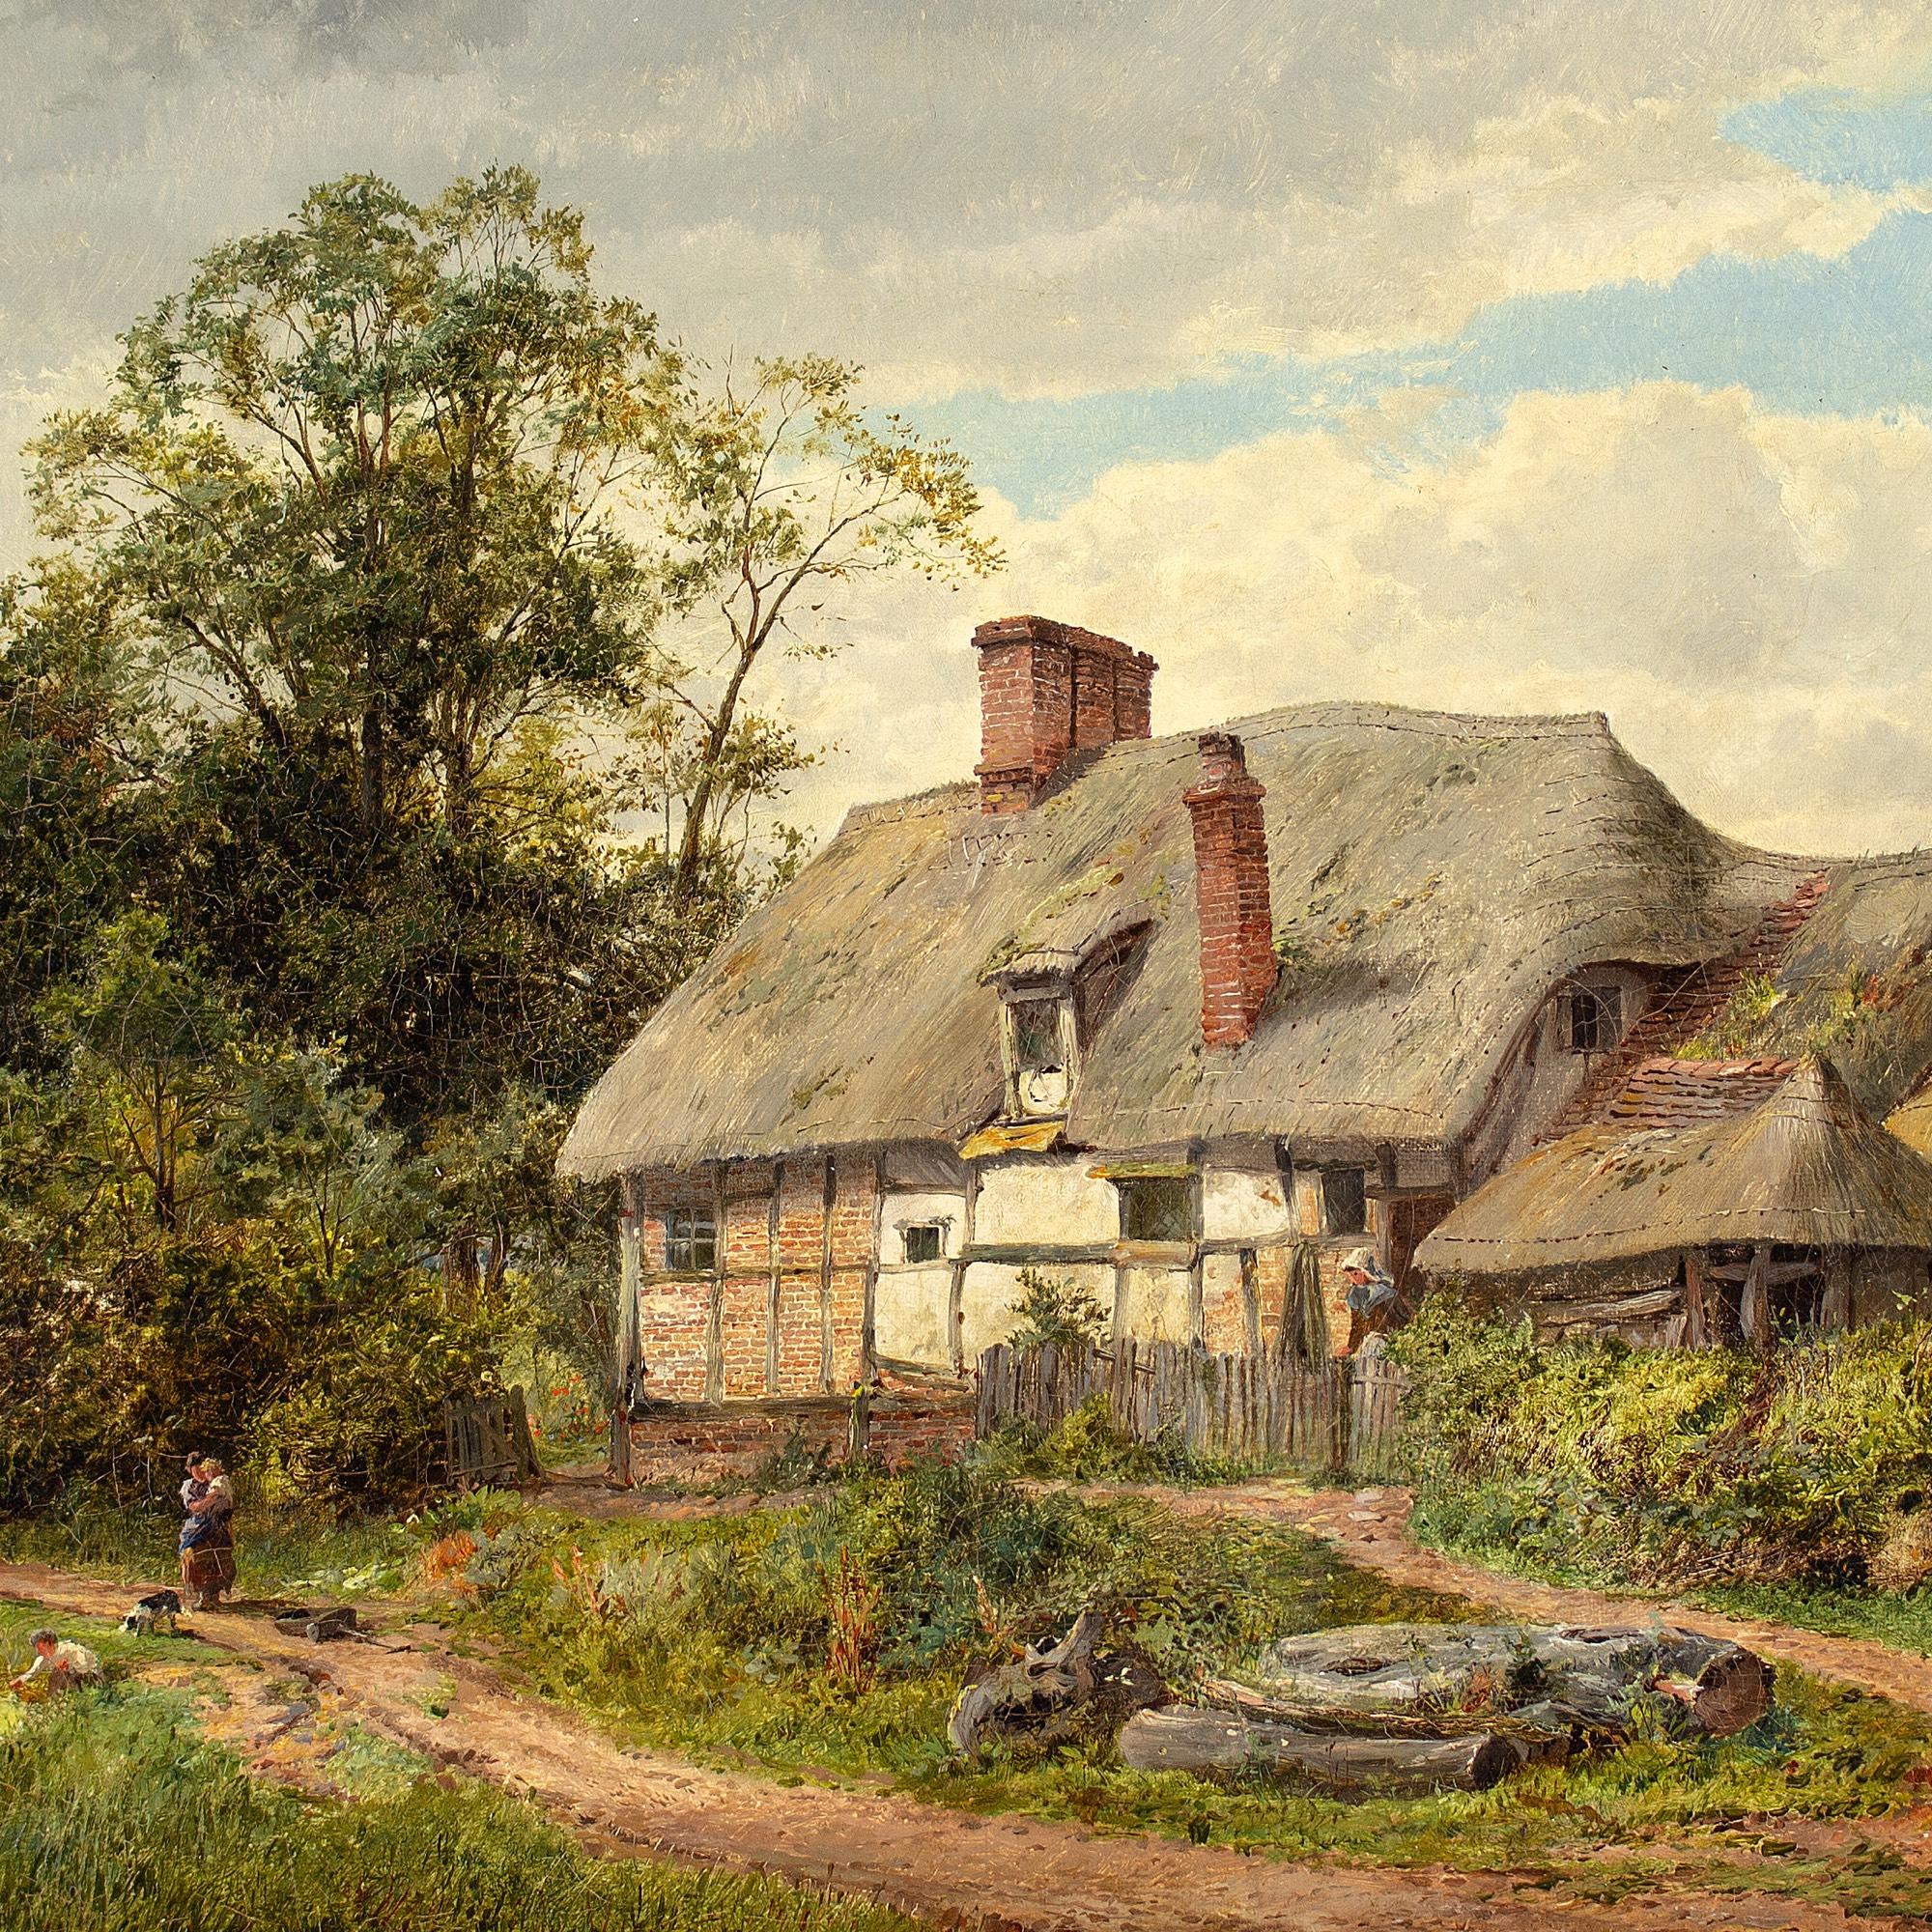 David Bates, Rural Landscape With Thatched Cottage, Country Track & Pond - English School Painting by David Bates b.1840